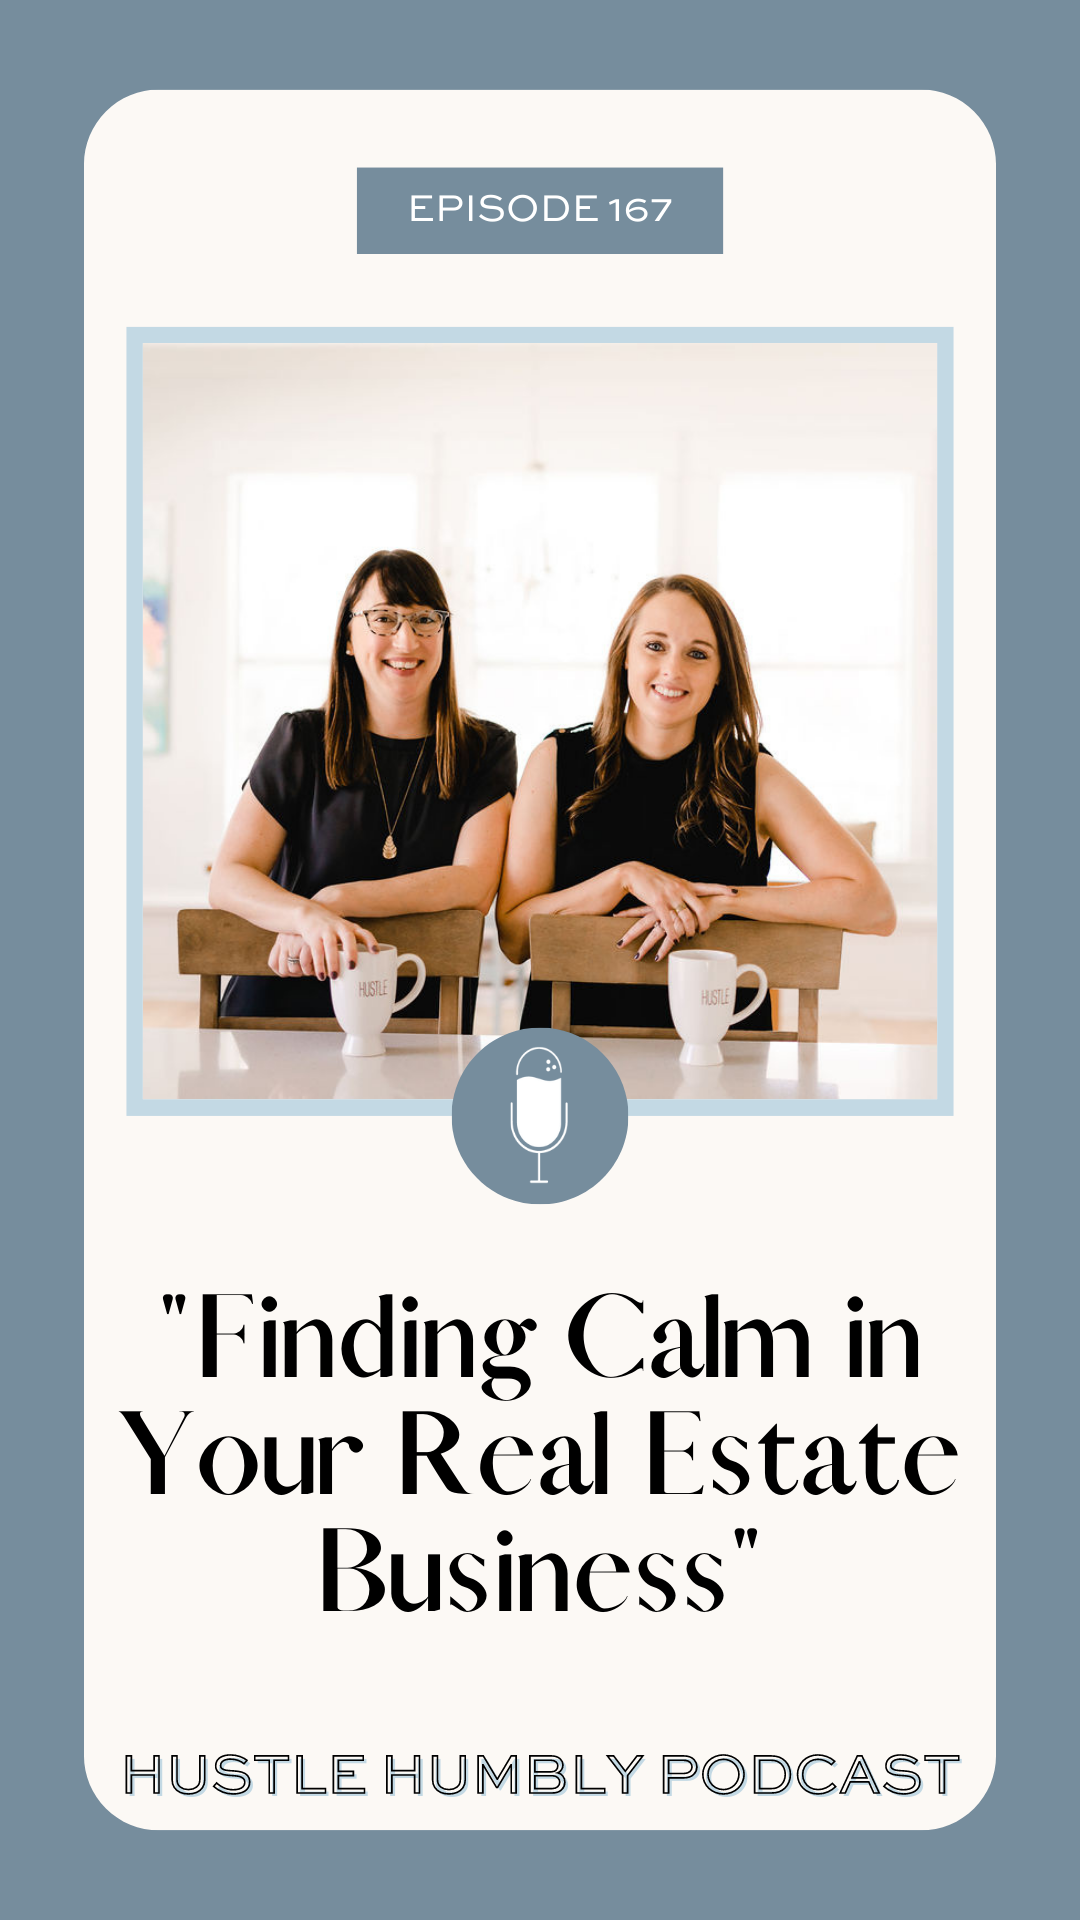 Hustle Humbly Podcast Episode 167: Finding Calm in Your Real Estate Business